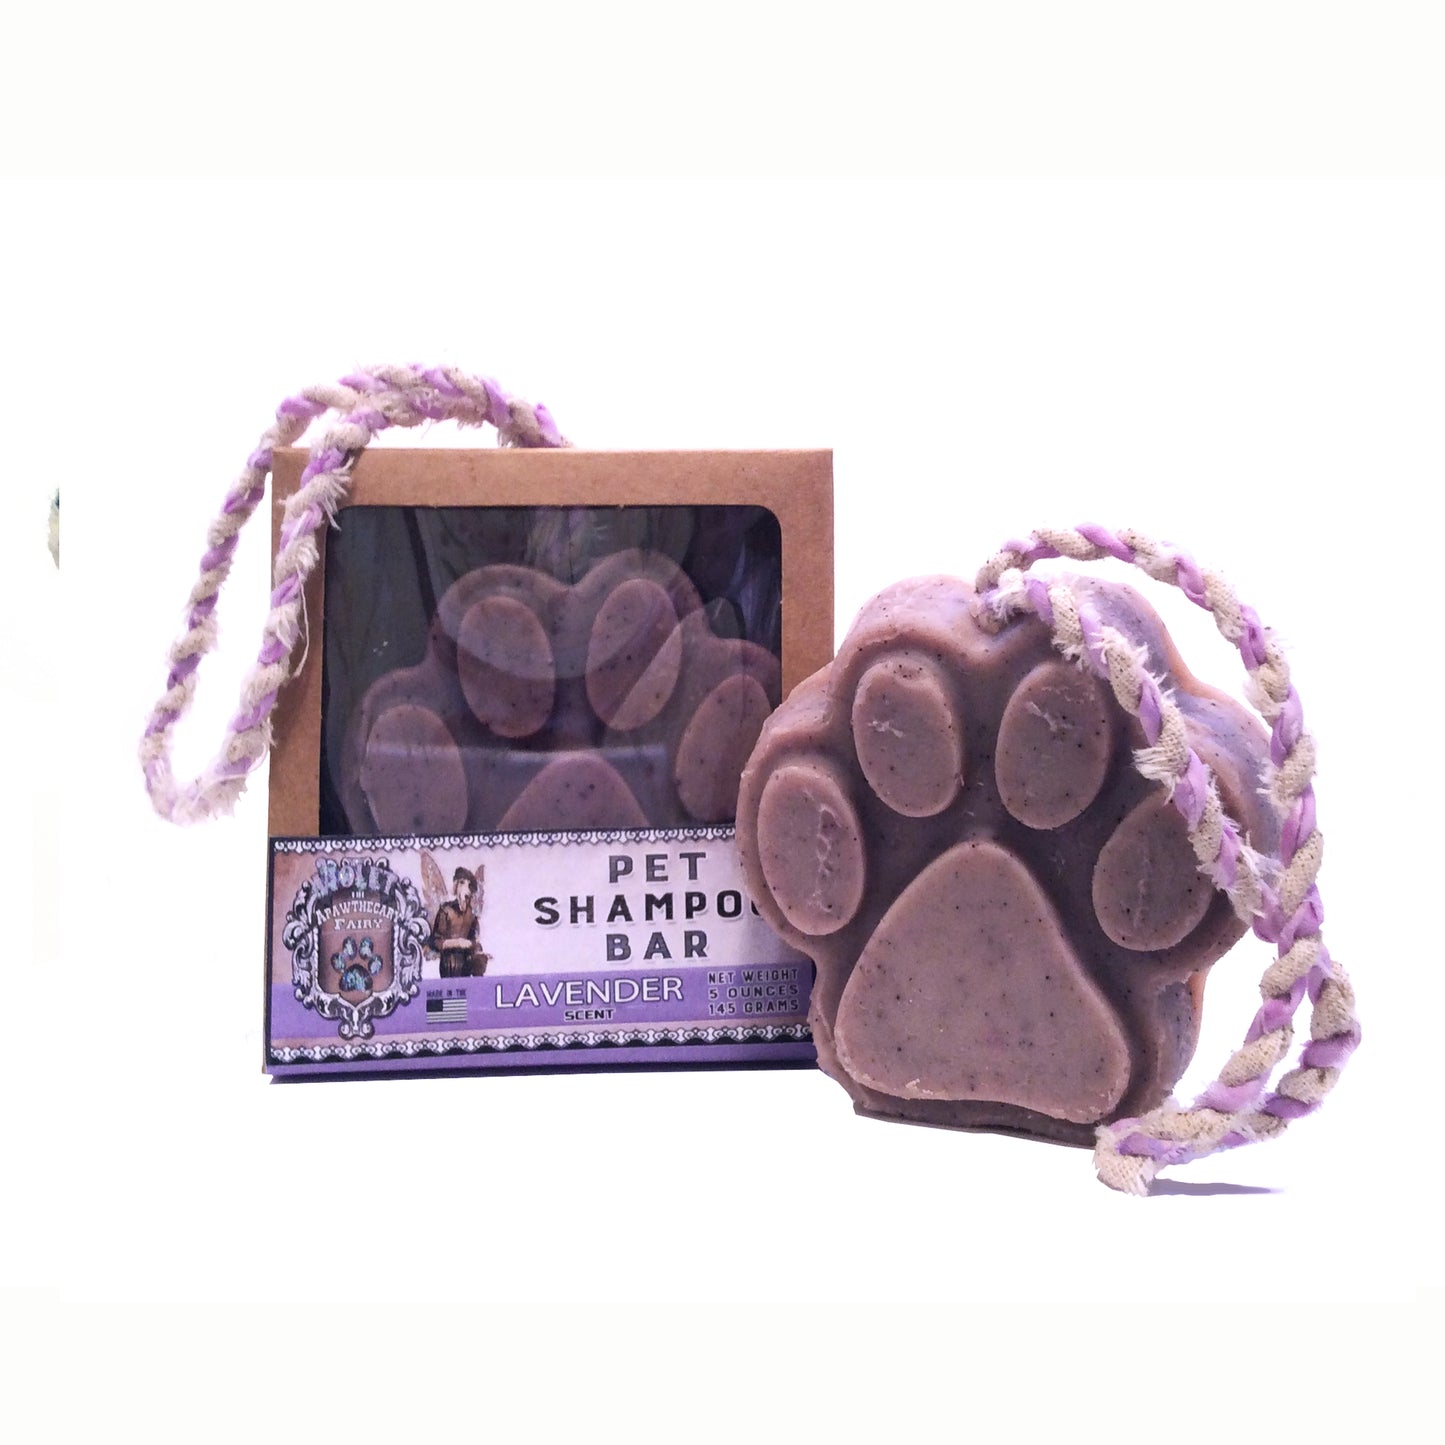 The League of Crafty Canines presents : The Lavender Experience - LEAGUE OF CRAFTY CANINES